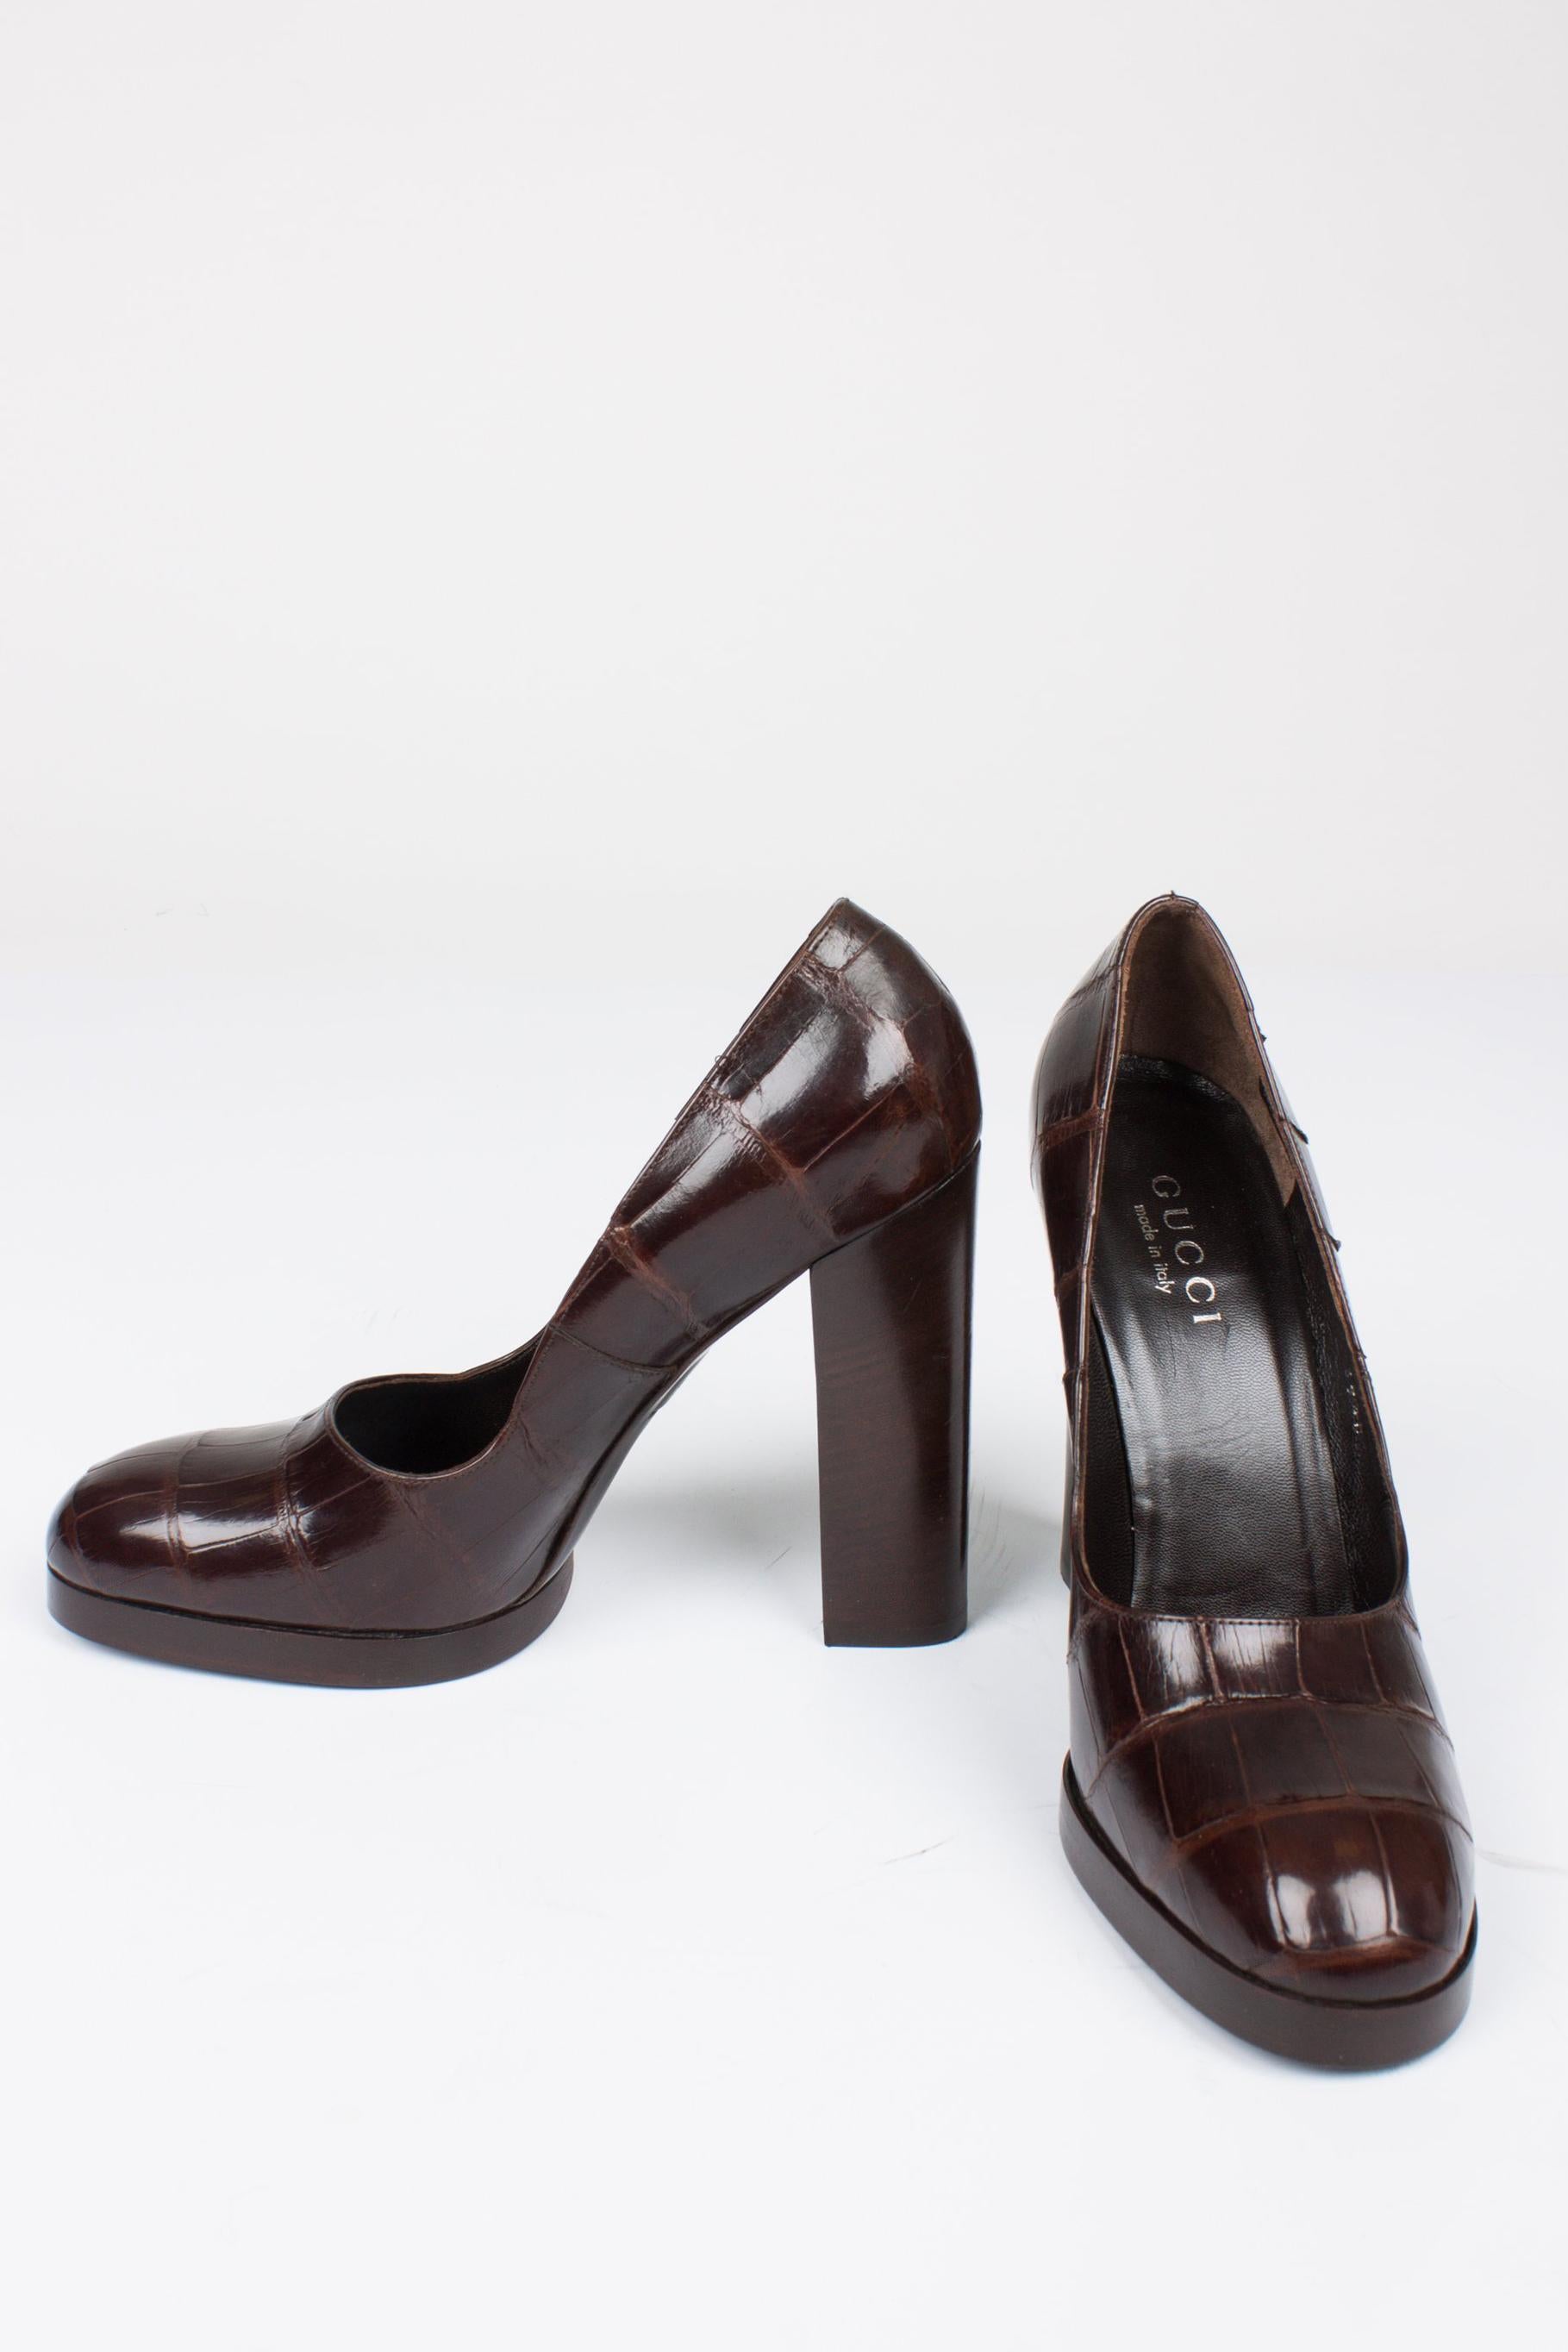 Very shiny brown croco pumps by Gucci, neat and classy!

This pair is new and never worn, the alligator leather and sole are impeccable. The dark brown heel measures 12 centimeters, platform 1,5 centimeters. Fully lined with dark brown leather.